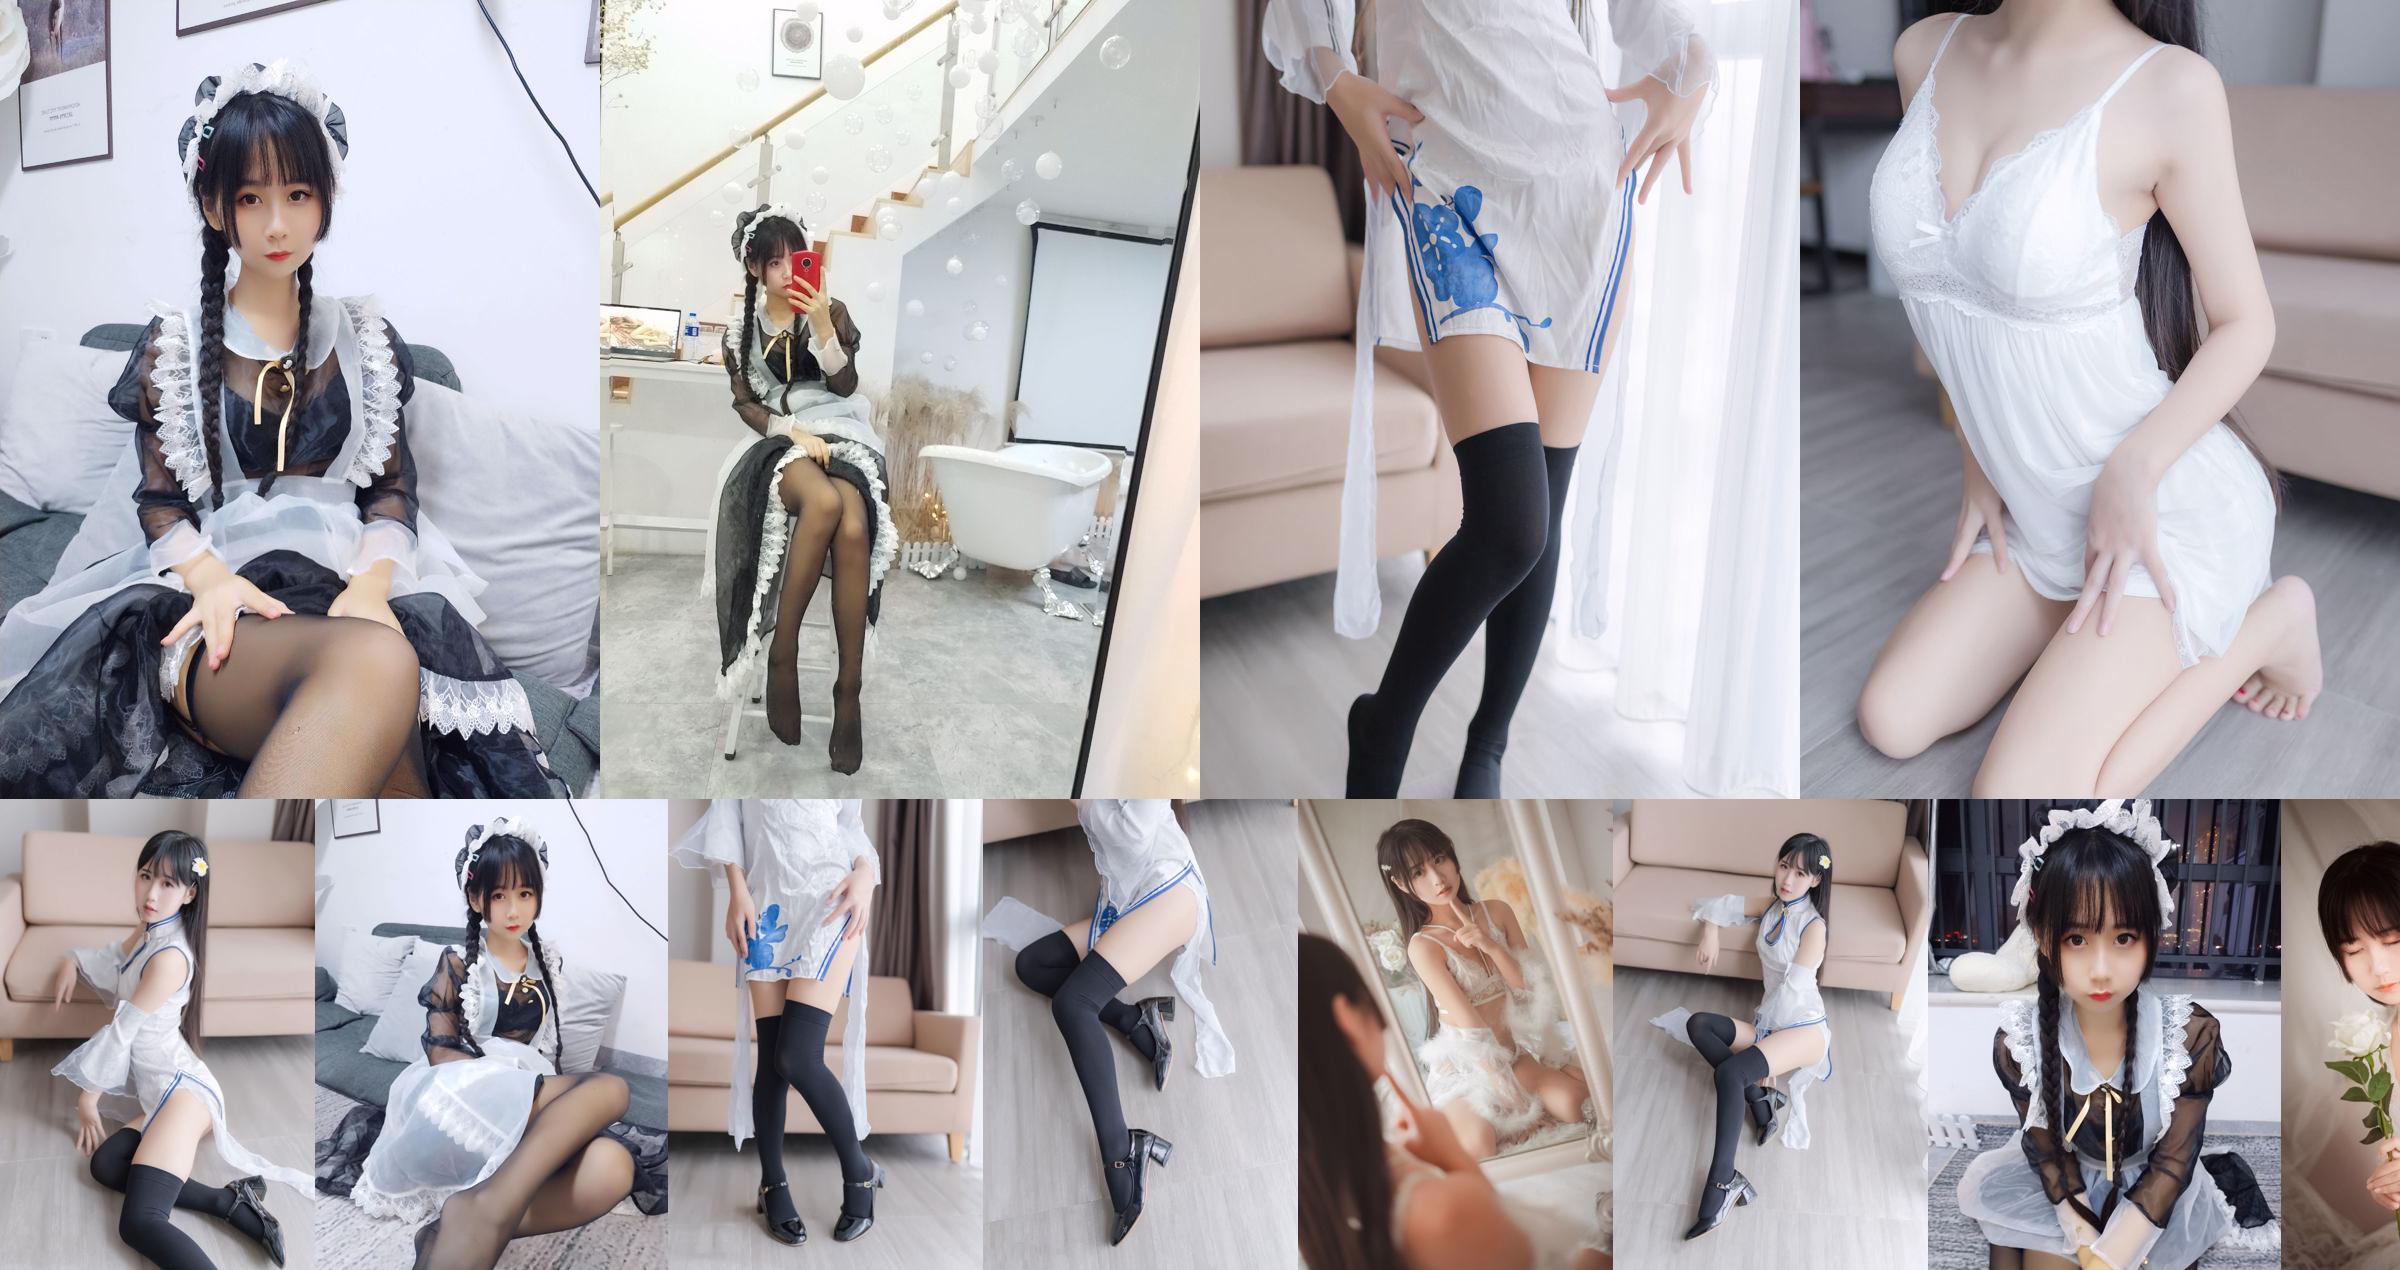 [Beauty Coser] Germination o0 "Bottle" No.1232f5 Page 2